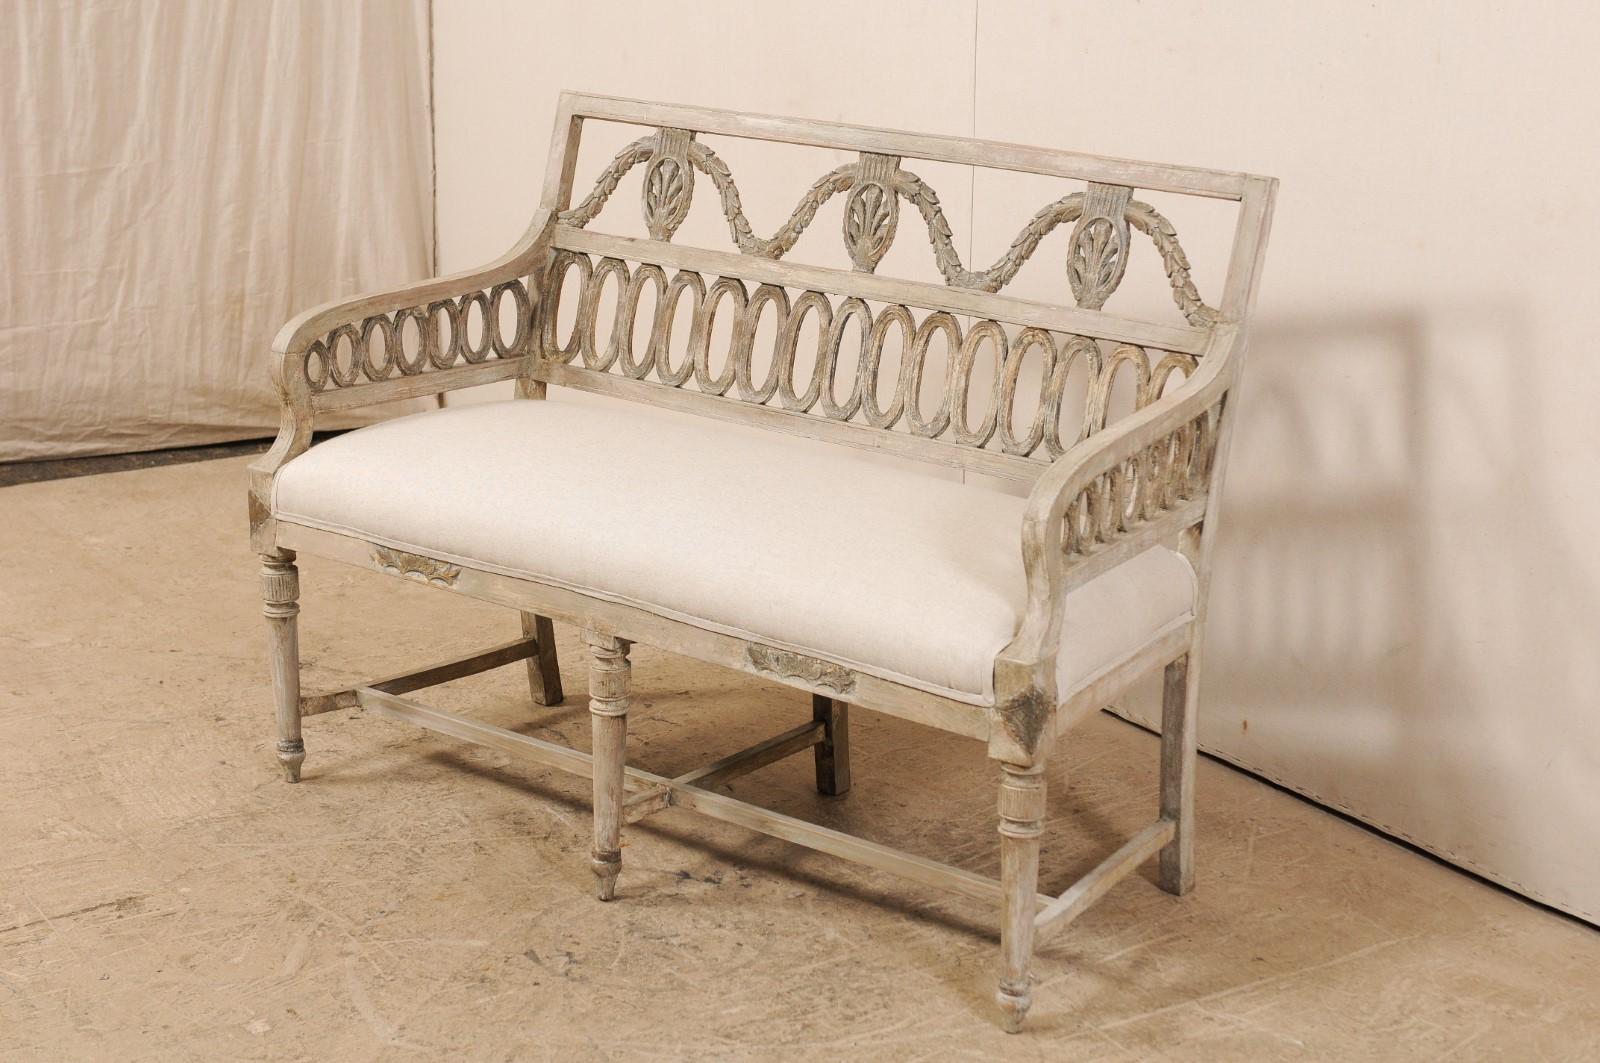 19th Century Swedish Period Late Gustavian Carved and Painted Wood Sofa Bench